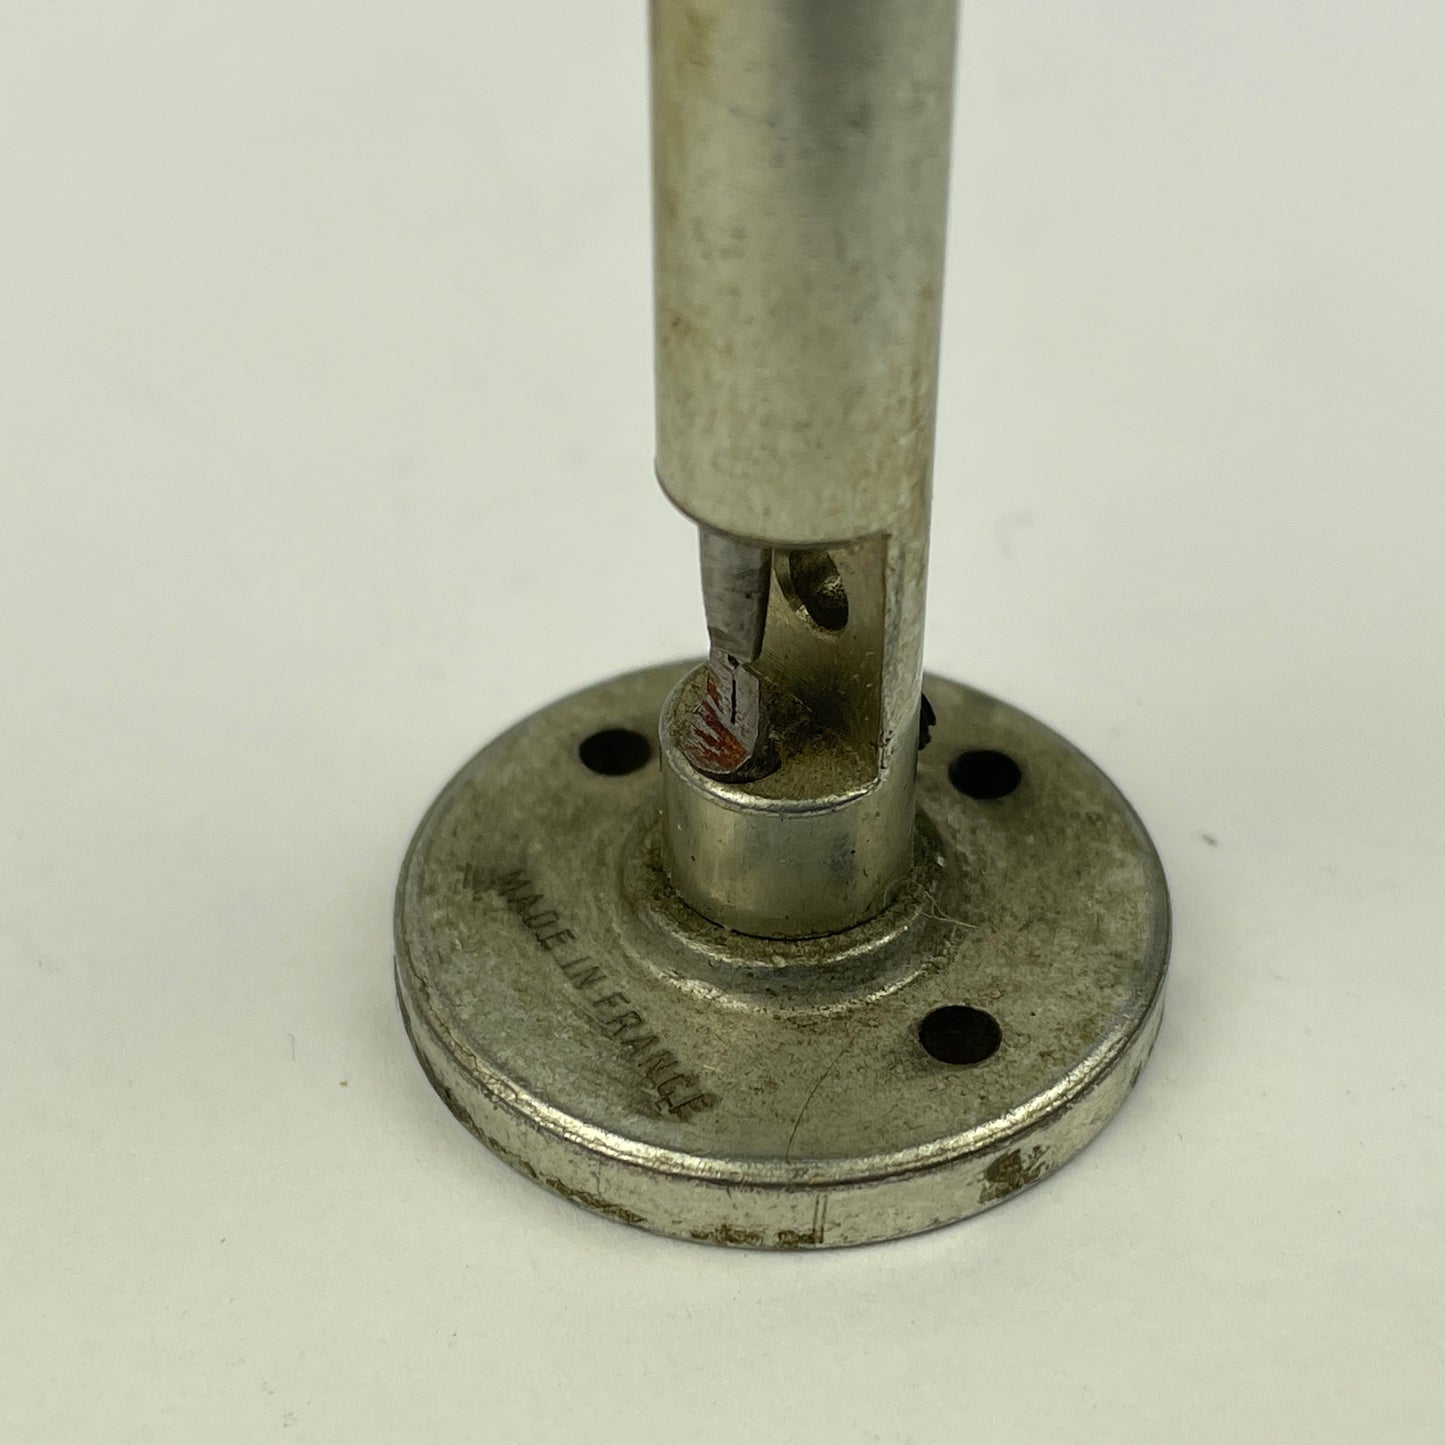 Lot 80- Watchmaker’s “CANNON” Pinion Tightener